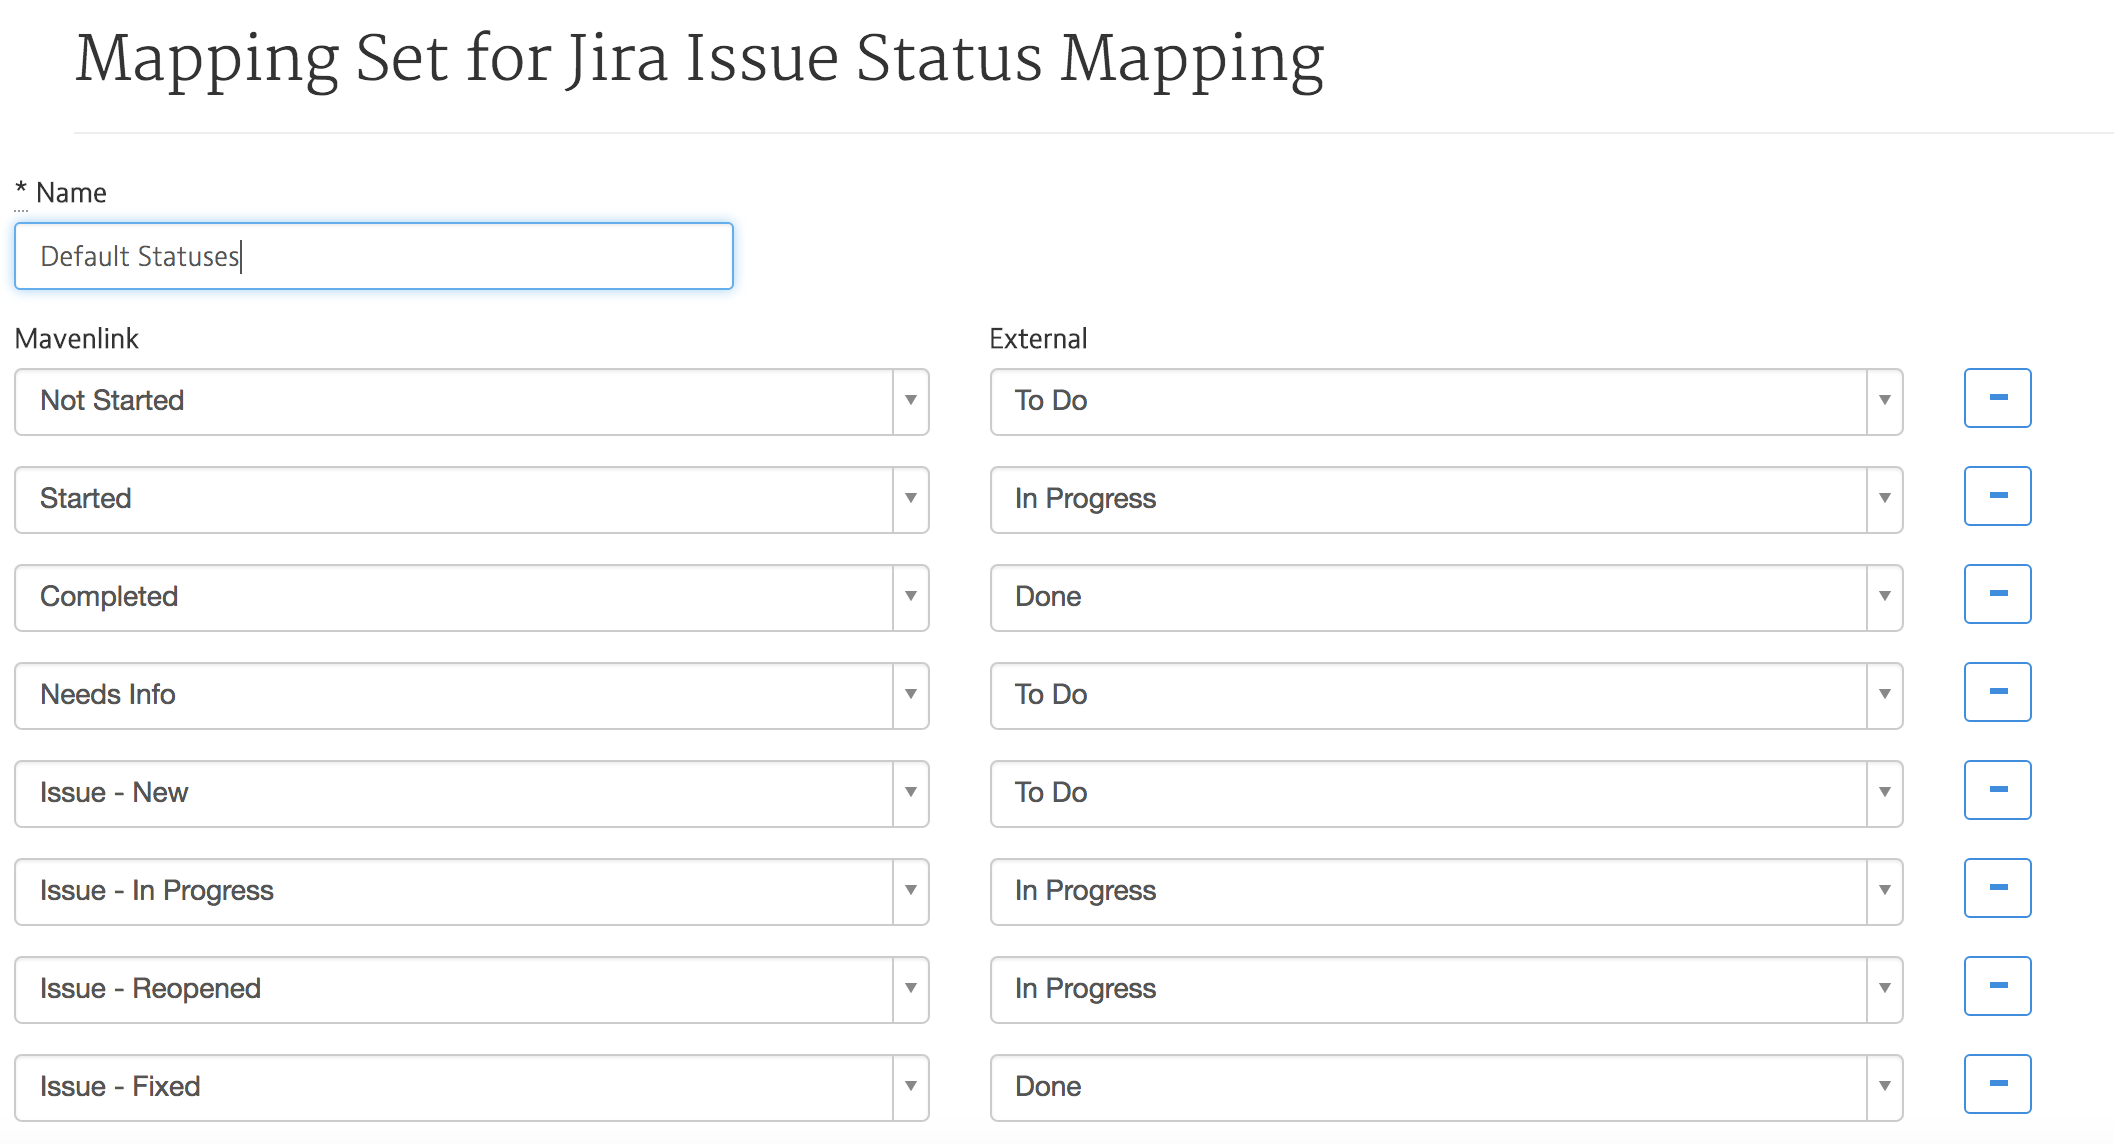 Jira_Integration_Mapping_Set_for_Jira_Issue_Status_Mapping.png